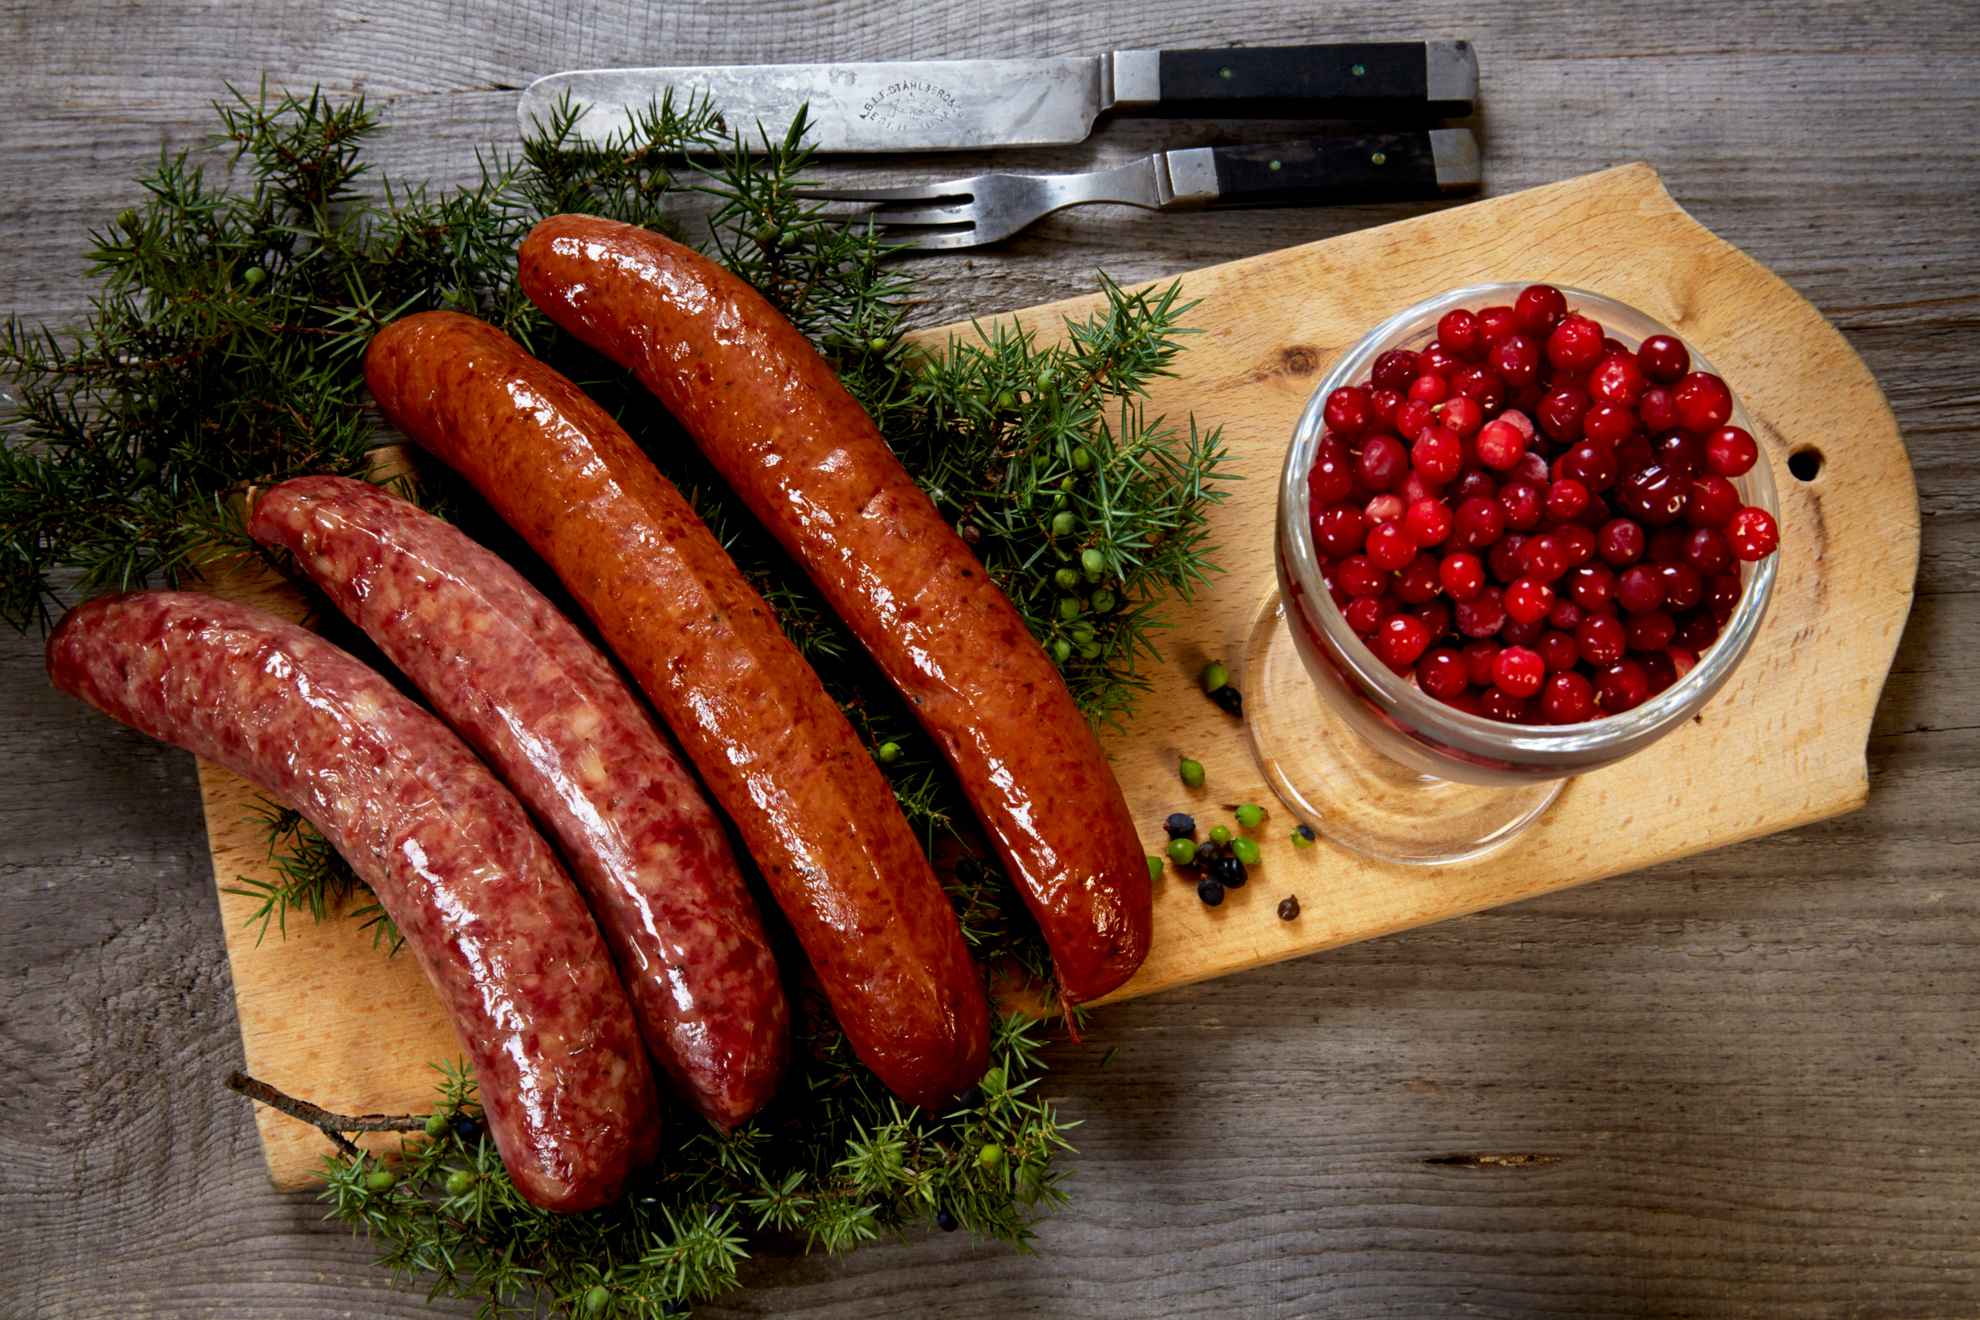 Four sausages of lard on a bed of juniper twigs on a wooden cutting board together with a bowl of lingonberries.